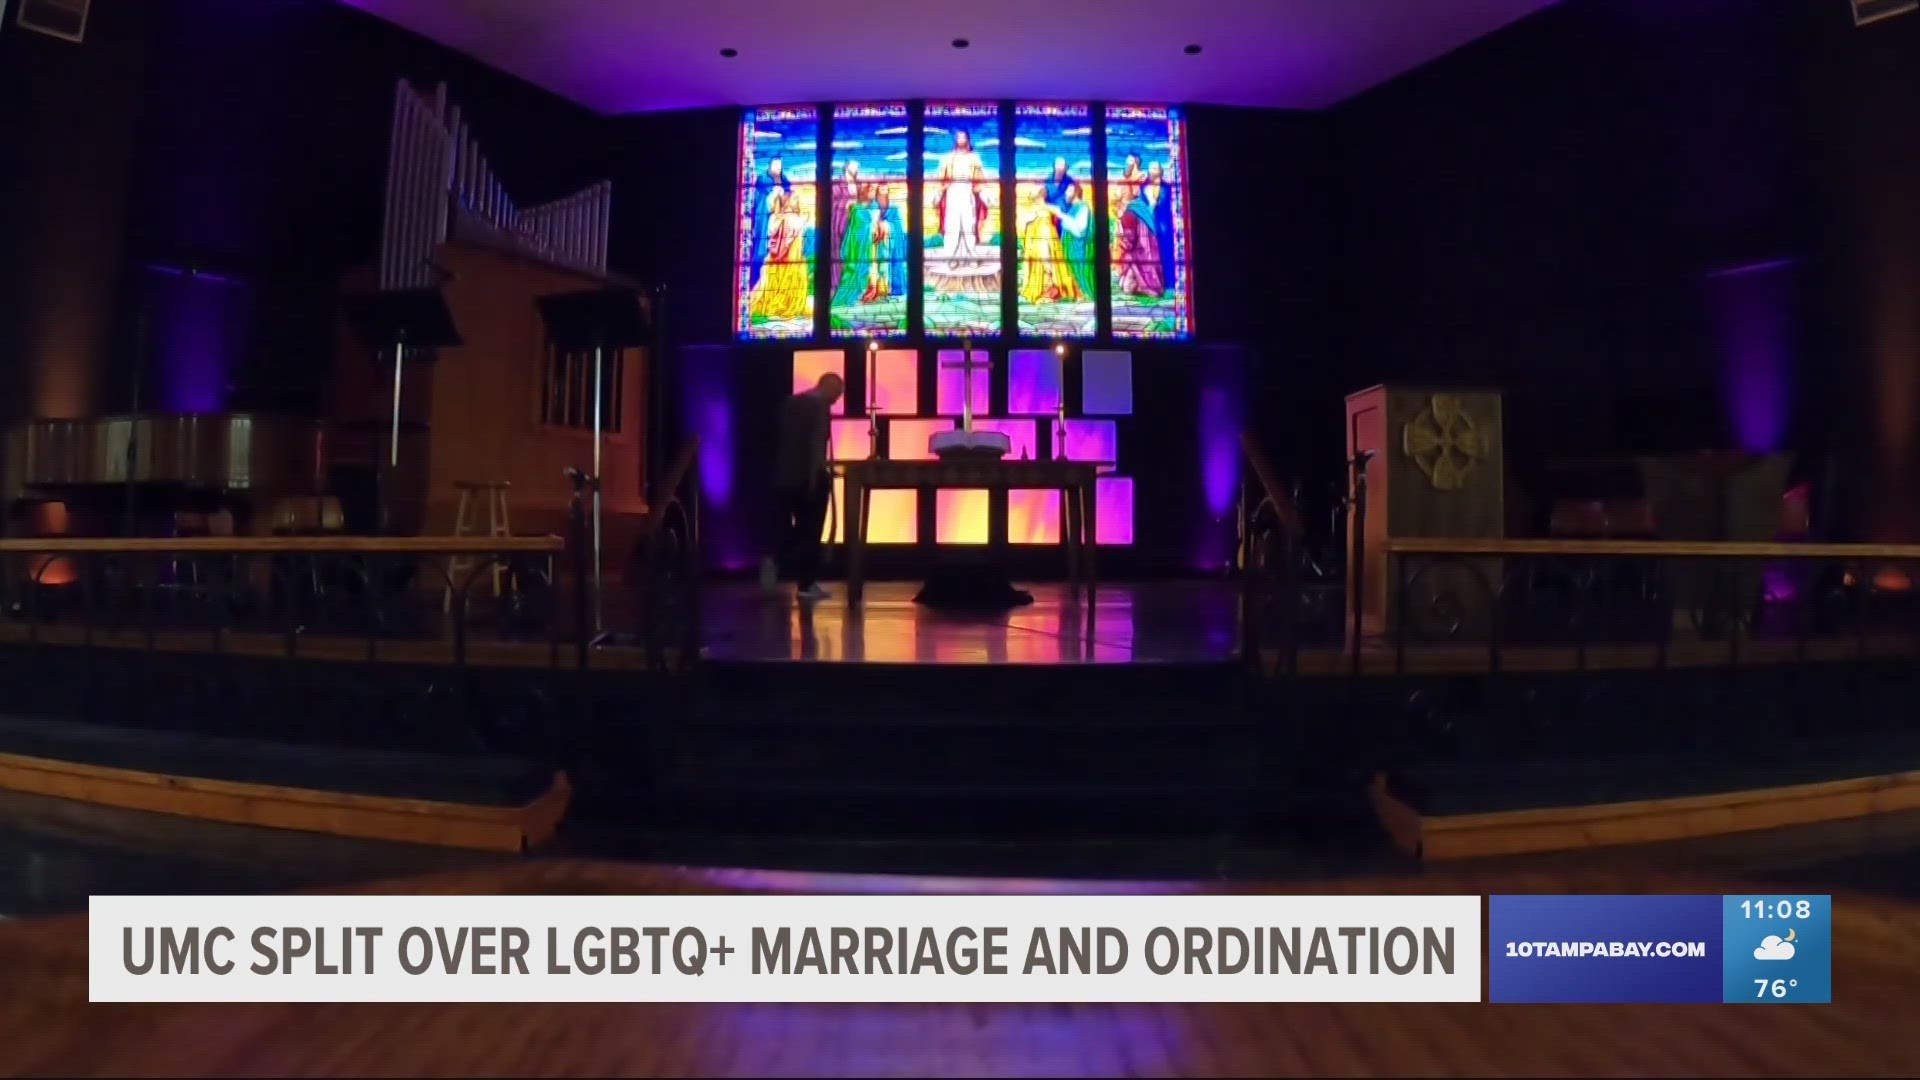 Some United Methodist churches have decided to disaffiliate due to their beliefs on same-sex marriage and a pastor's sexuality.